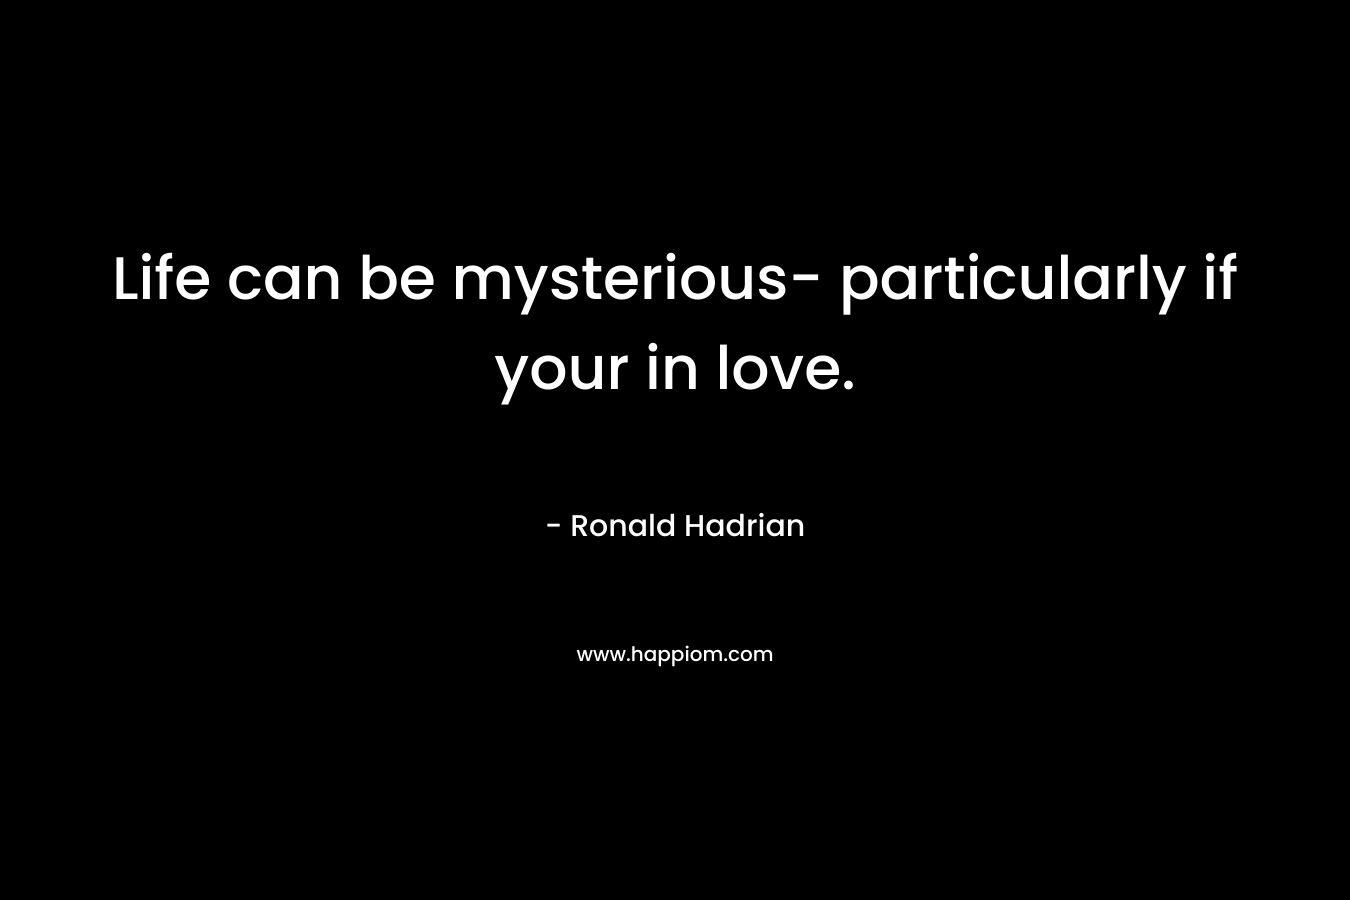 Life can be mysterious- particularly if your in love.